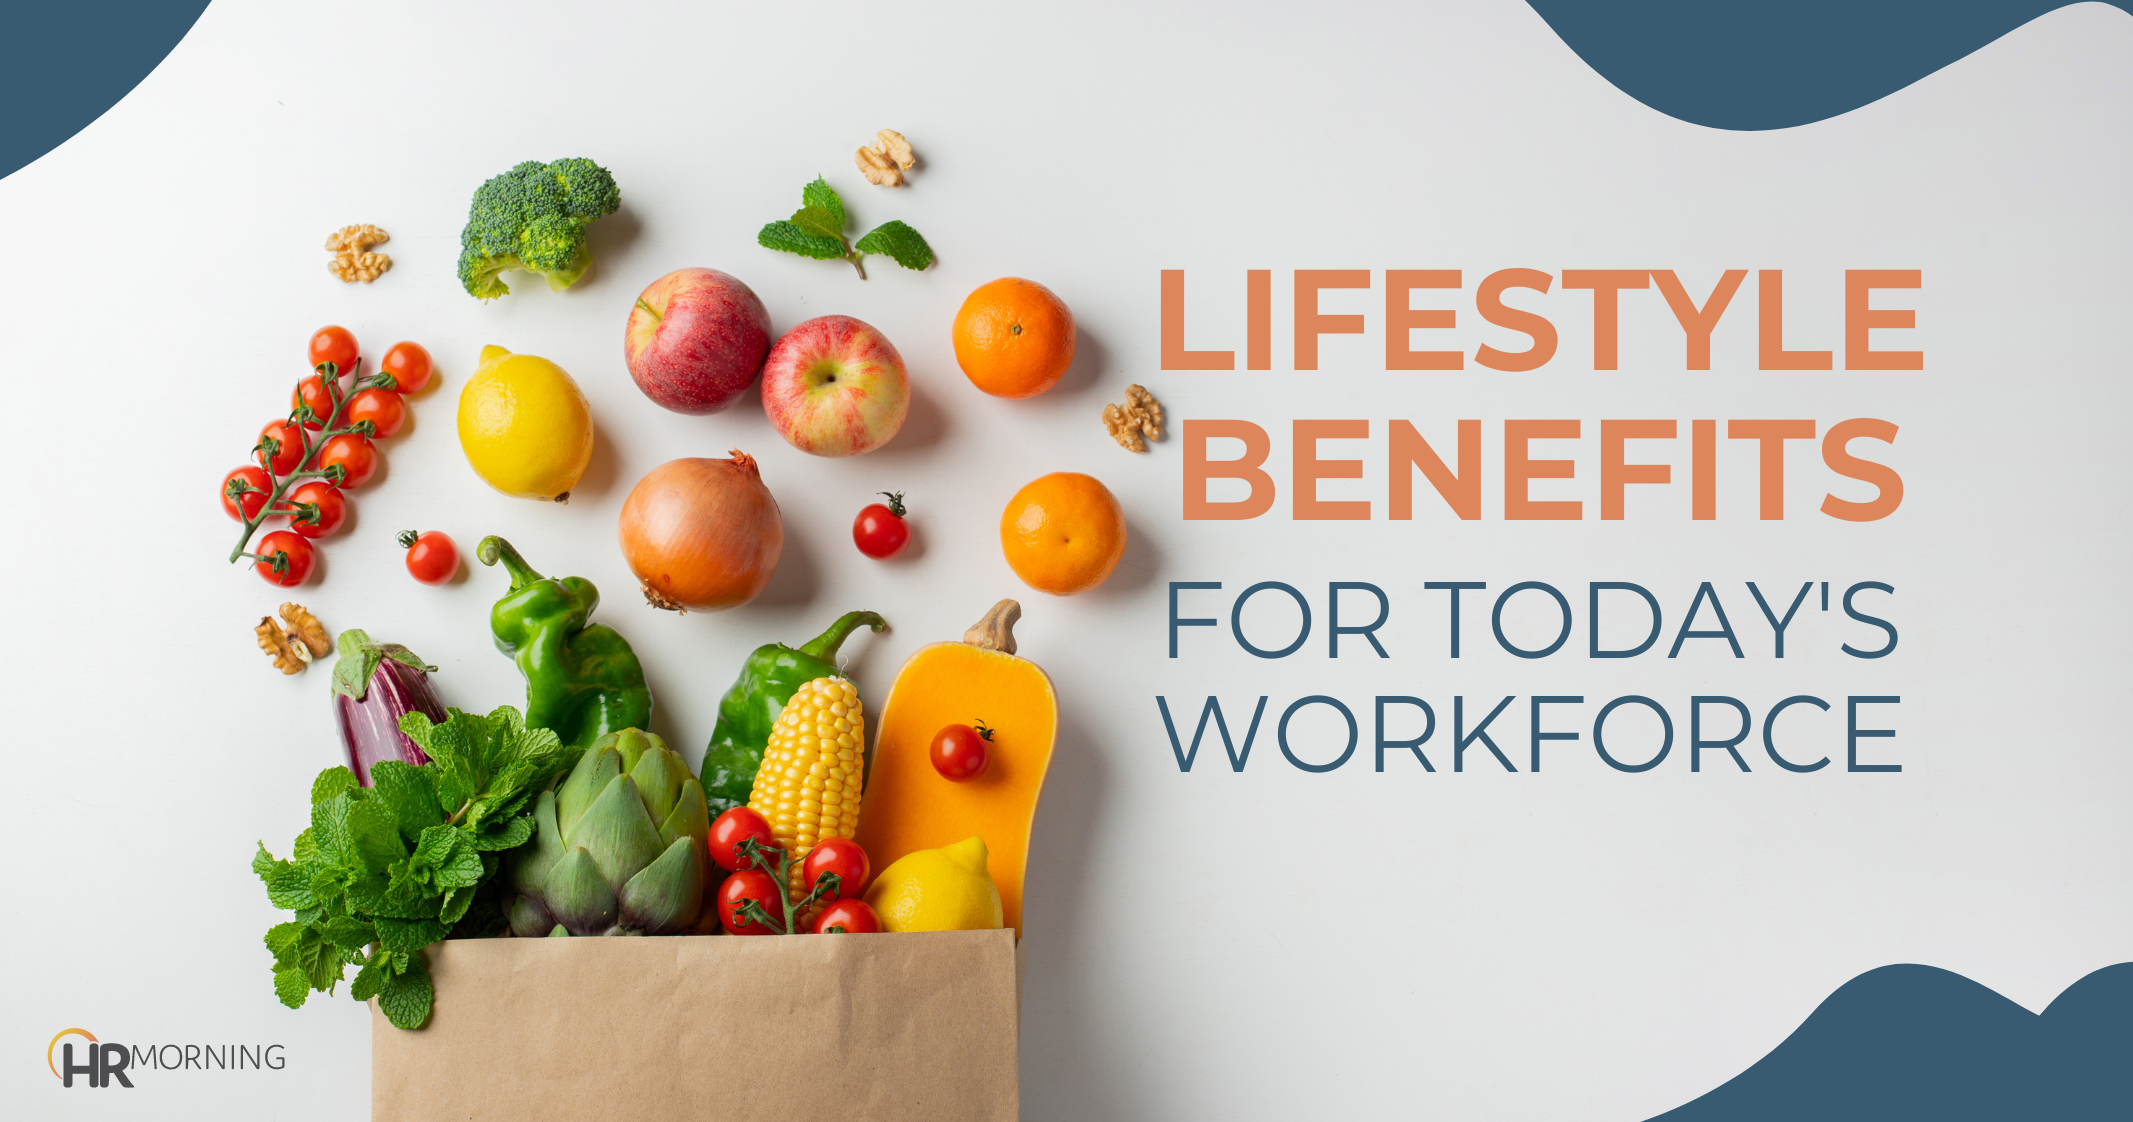 Lifestyle benefits for today's workforce